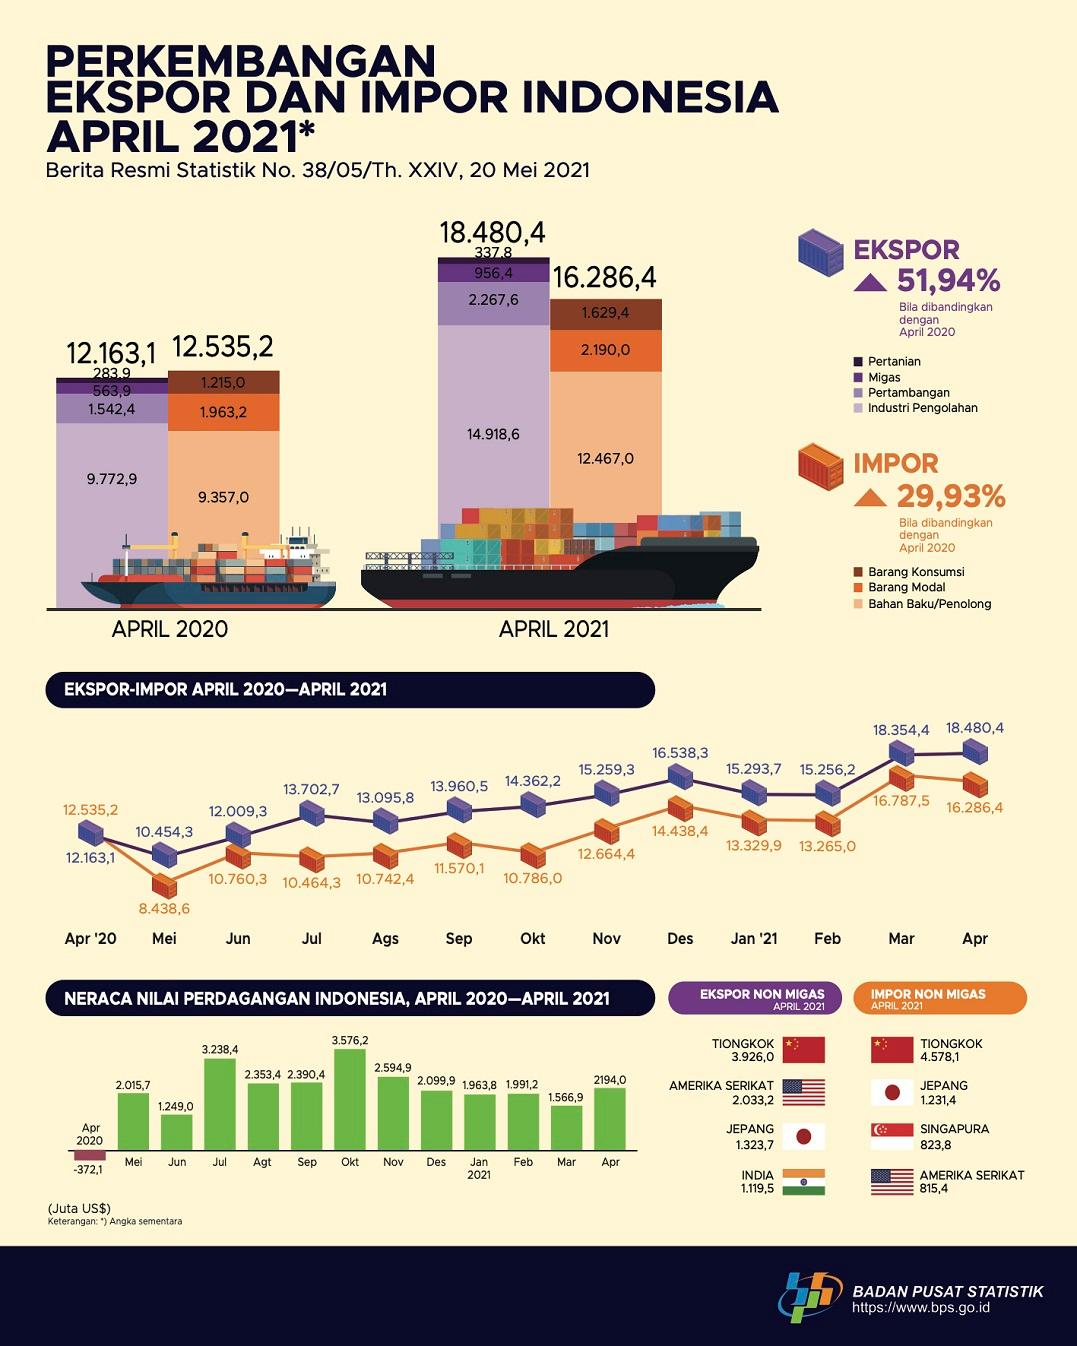 April 2021 exports reached US$18.48 billion, imports reached to US$16.29 billion